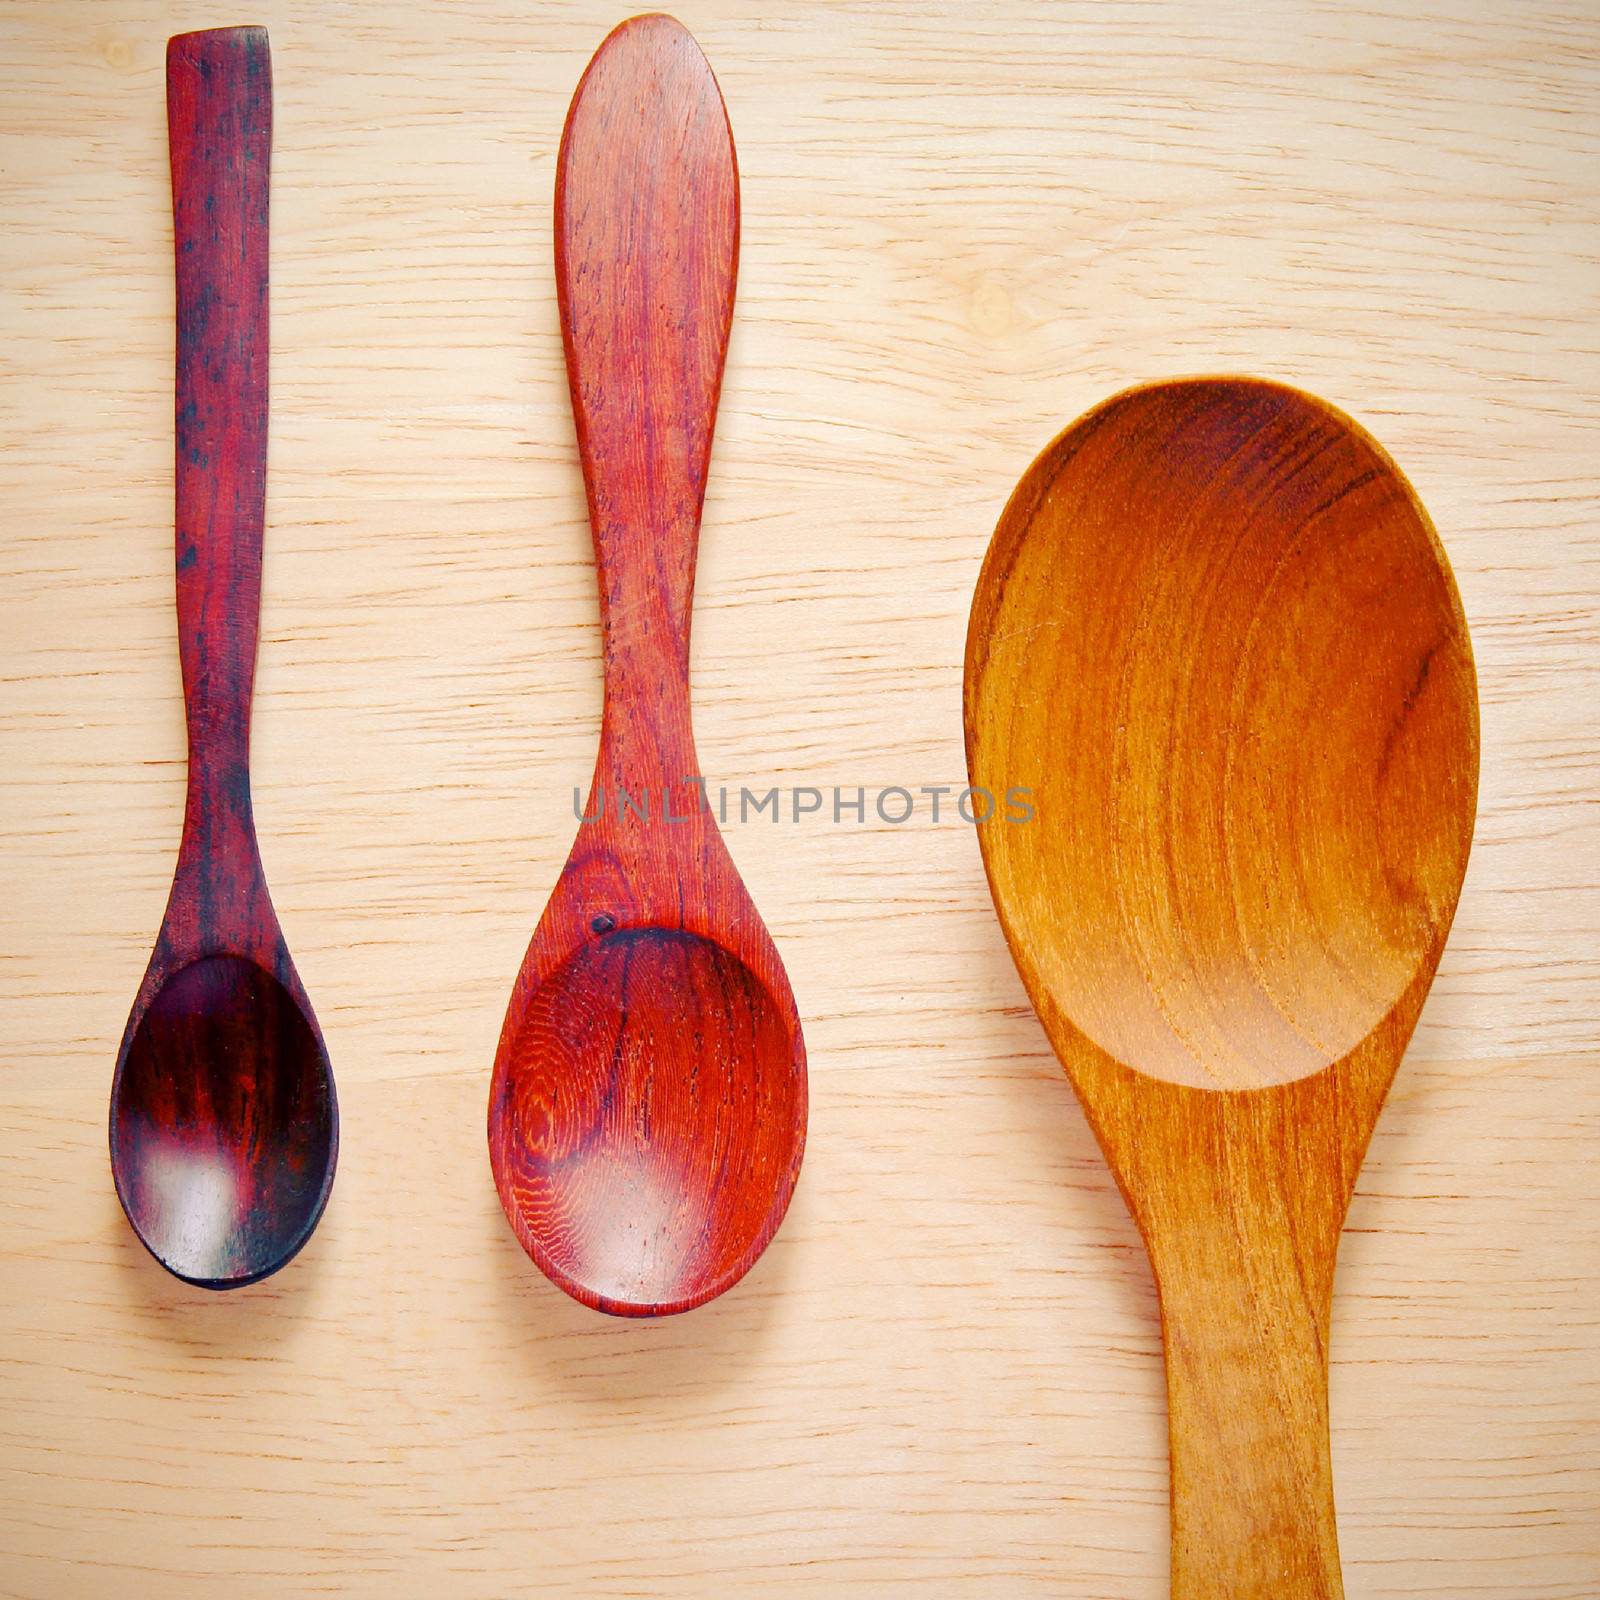 Collection of wooden kitchen spoons with retro filter effect by nuchylee